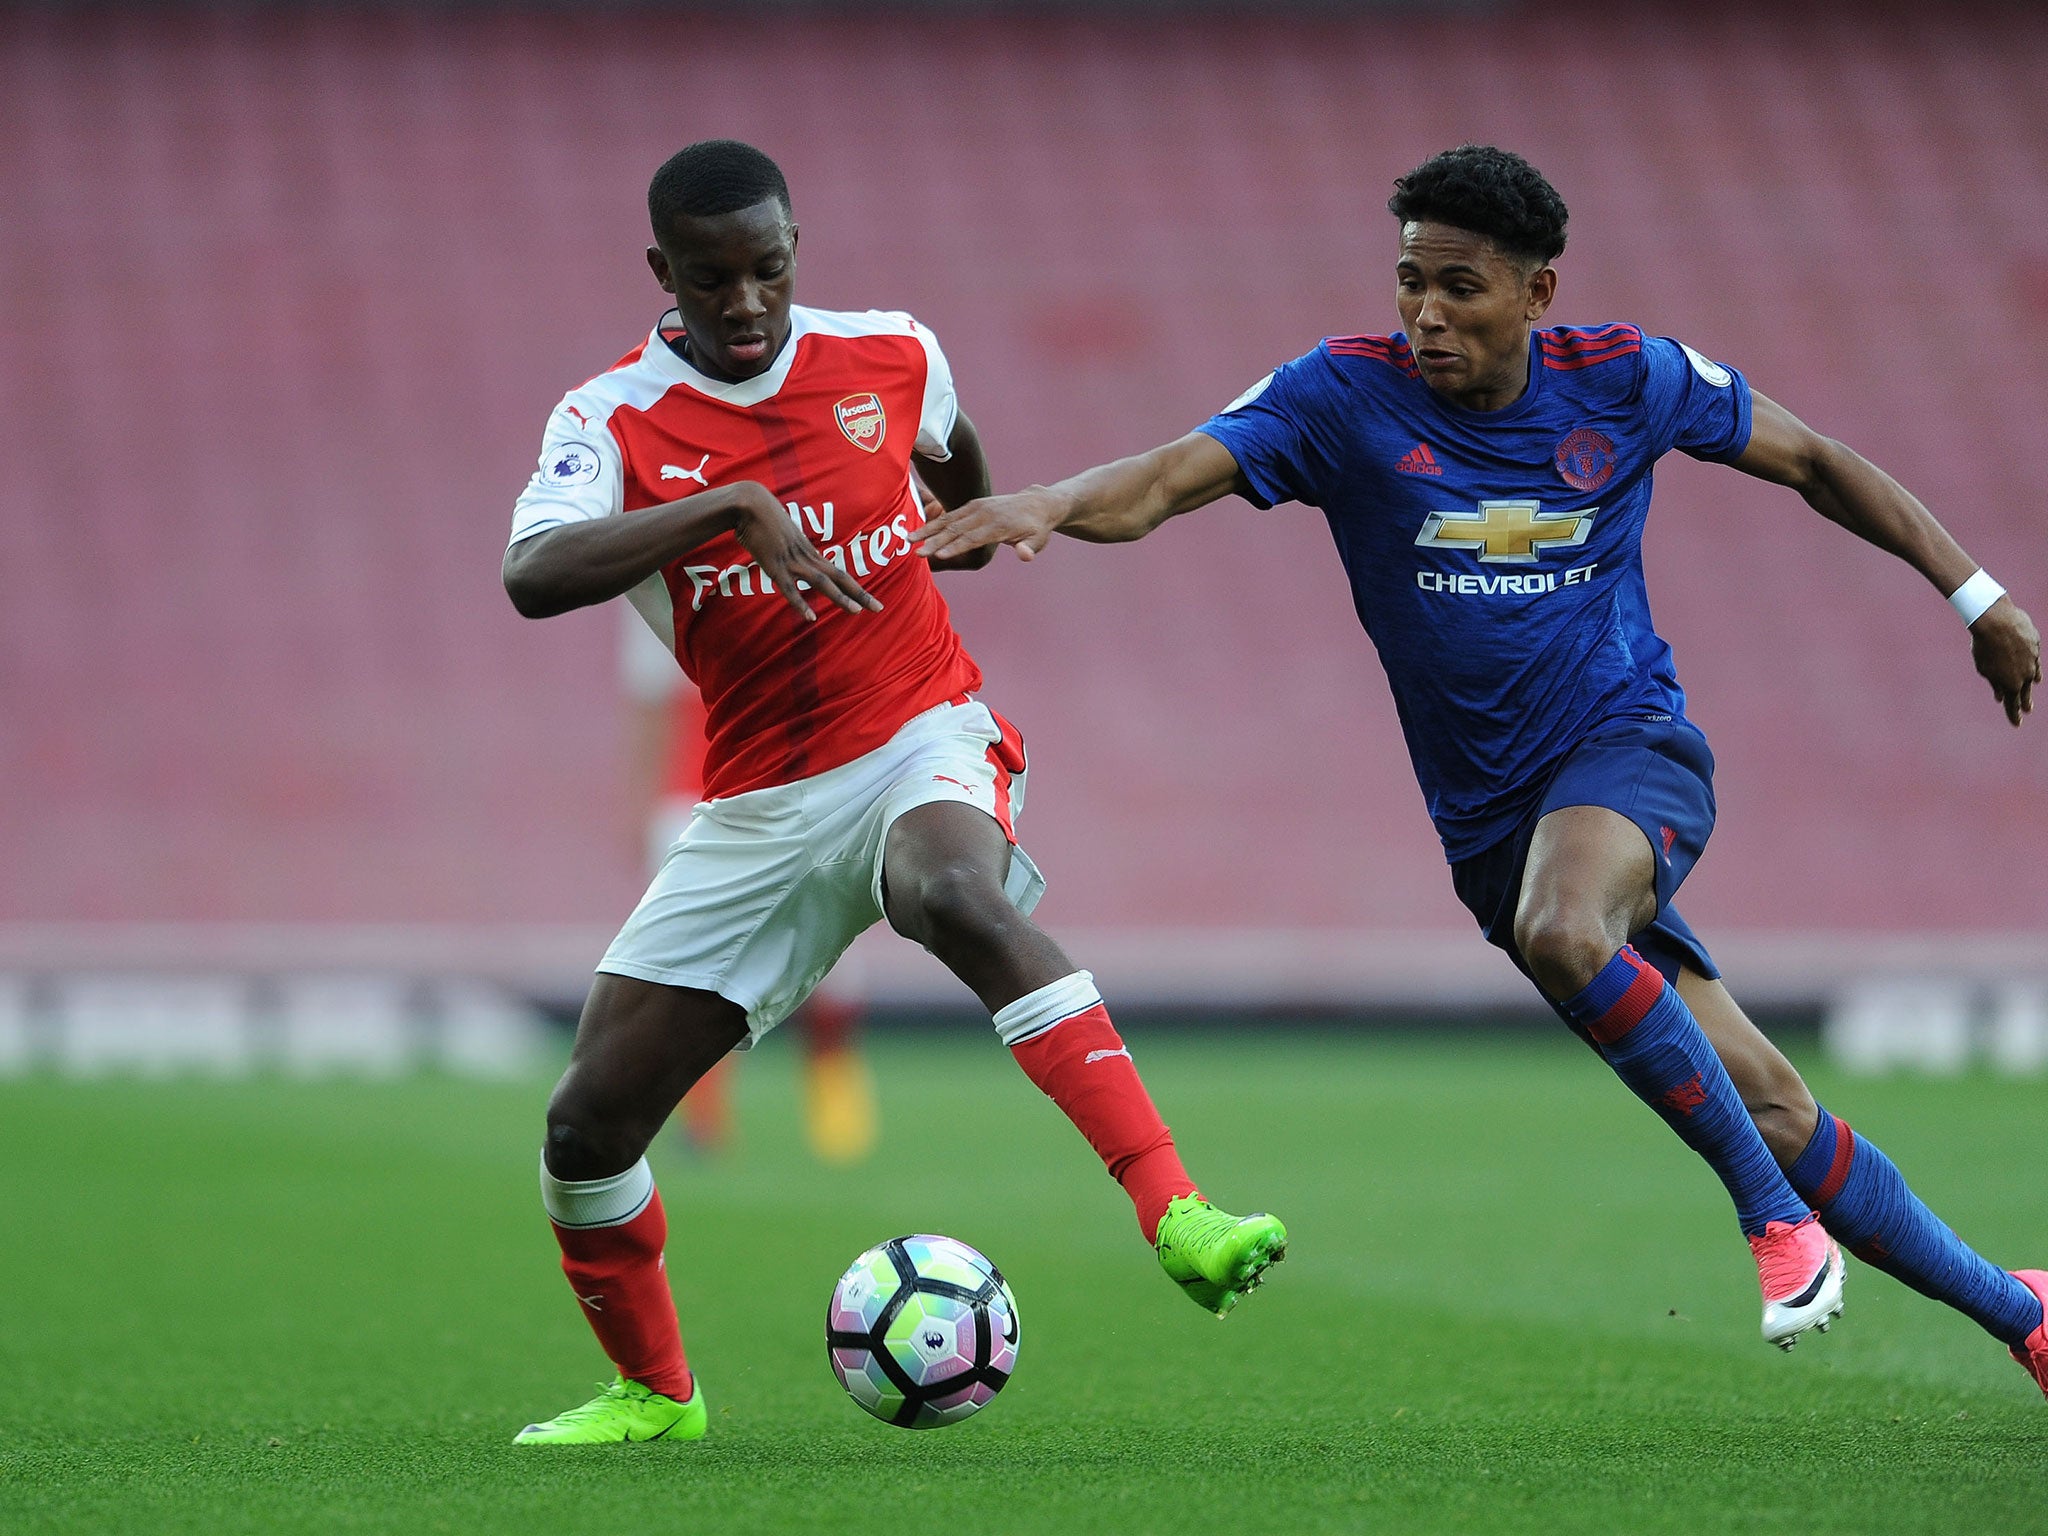 Demetri Mitchell stars in a PL 2 game for United